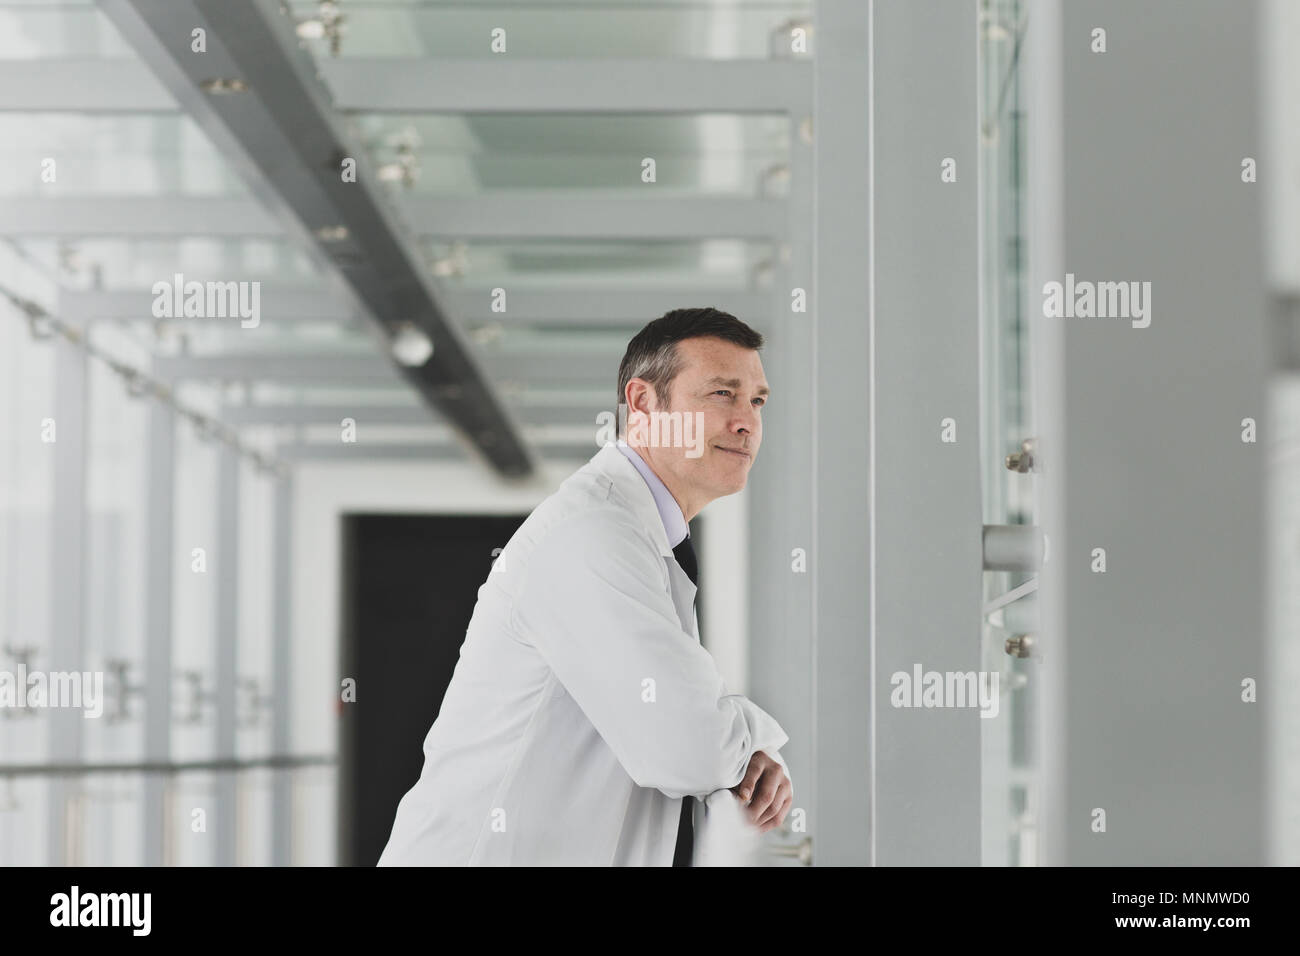 Healthcare professional looking out of window in a modern hospital Stock Photo